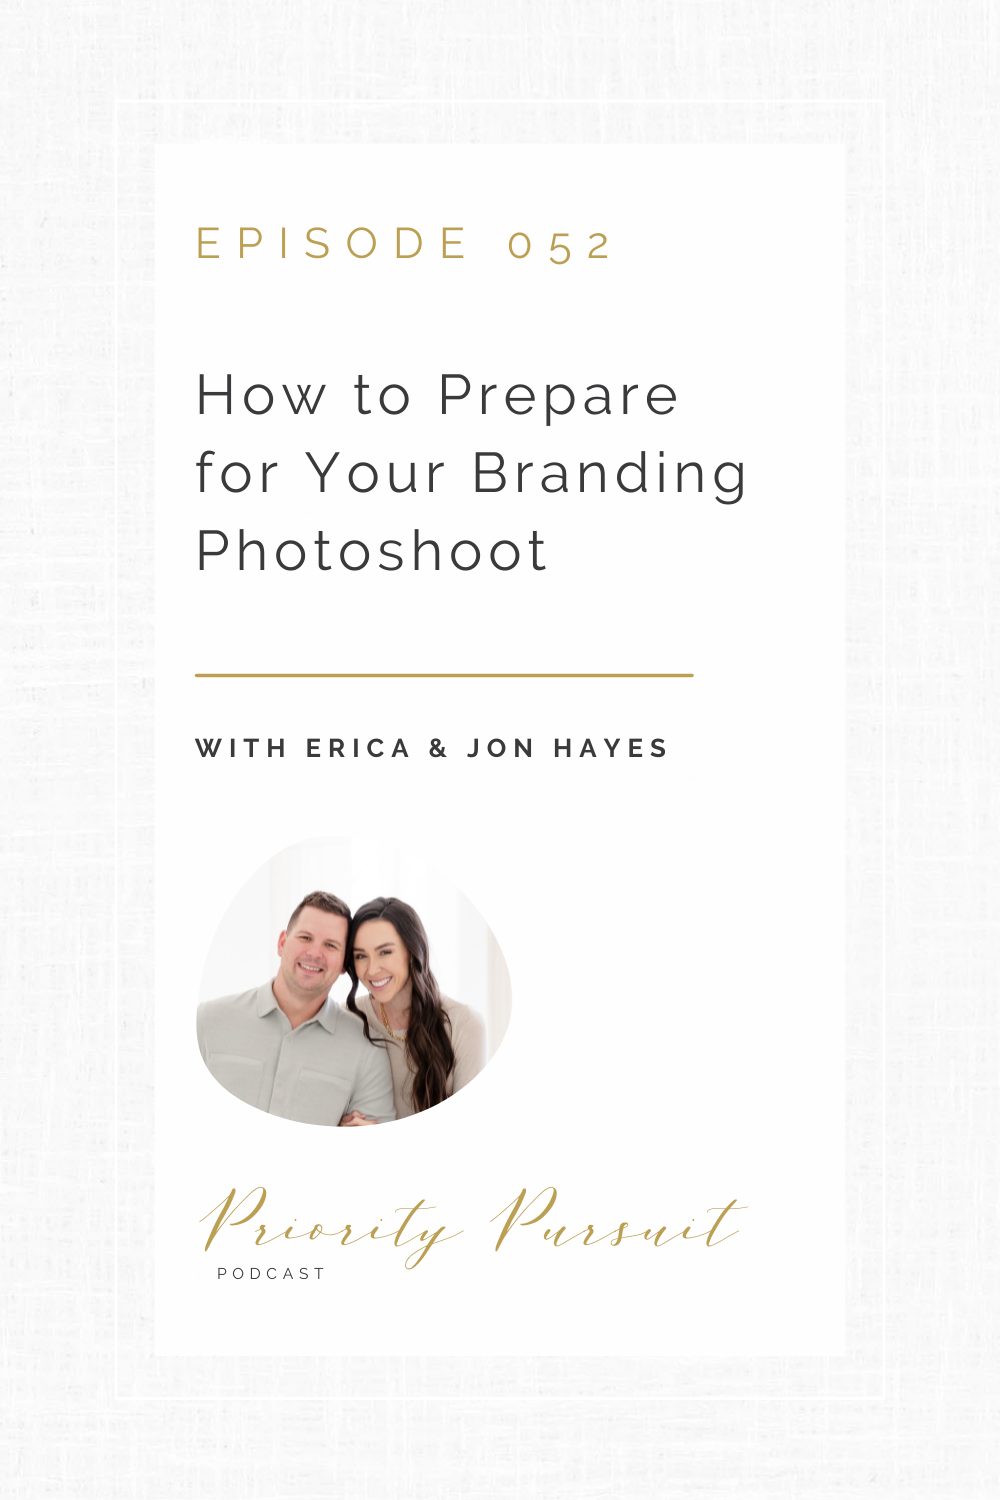 Victoria Rayburn and Erica and Jon Hayes discuss how to prepare for your branding photoshoot